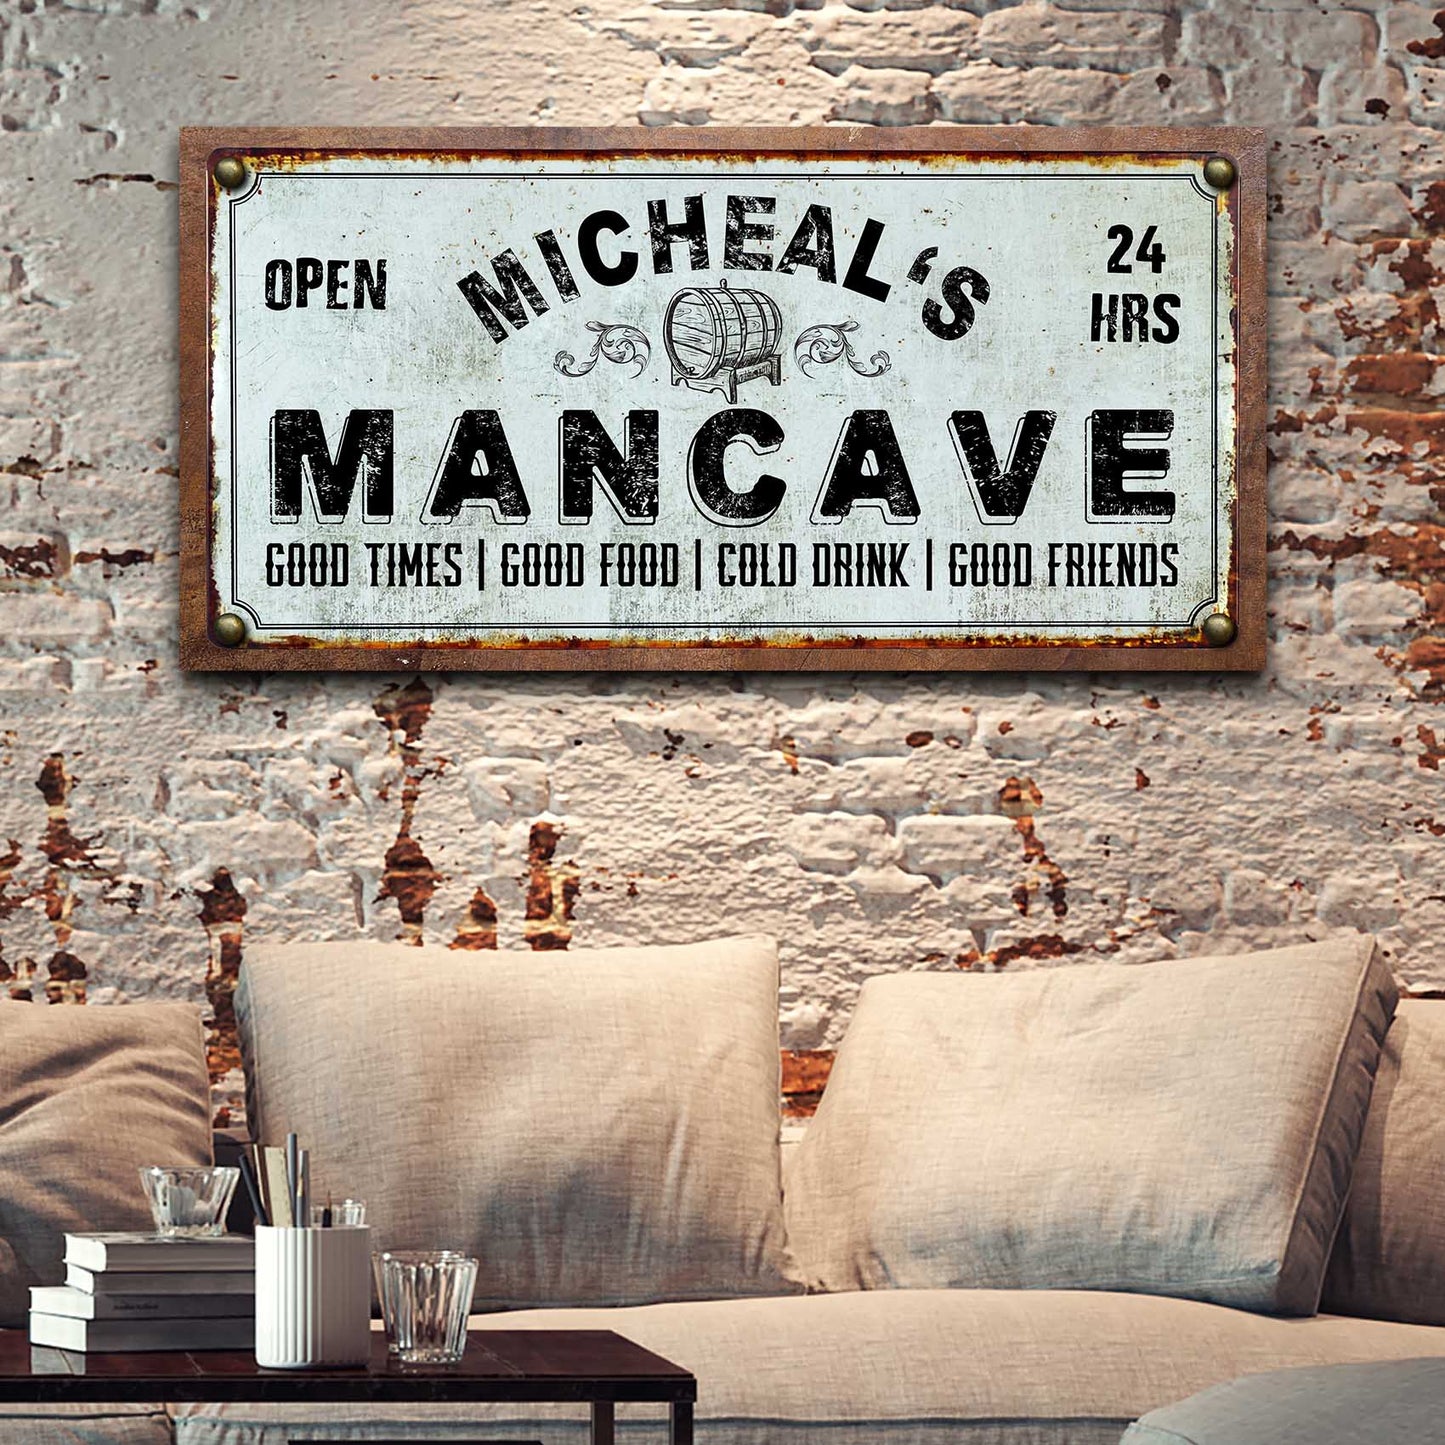 Man Cave Sign - Image by Tailored Canvases